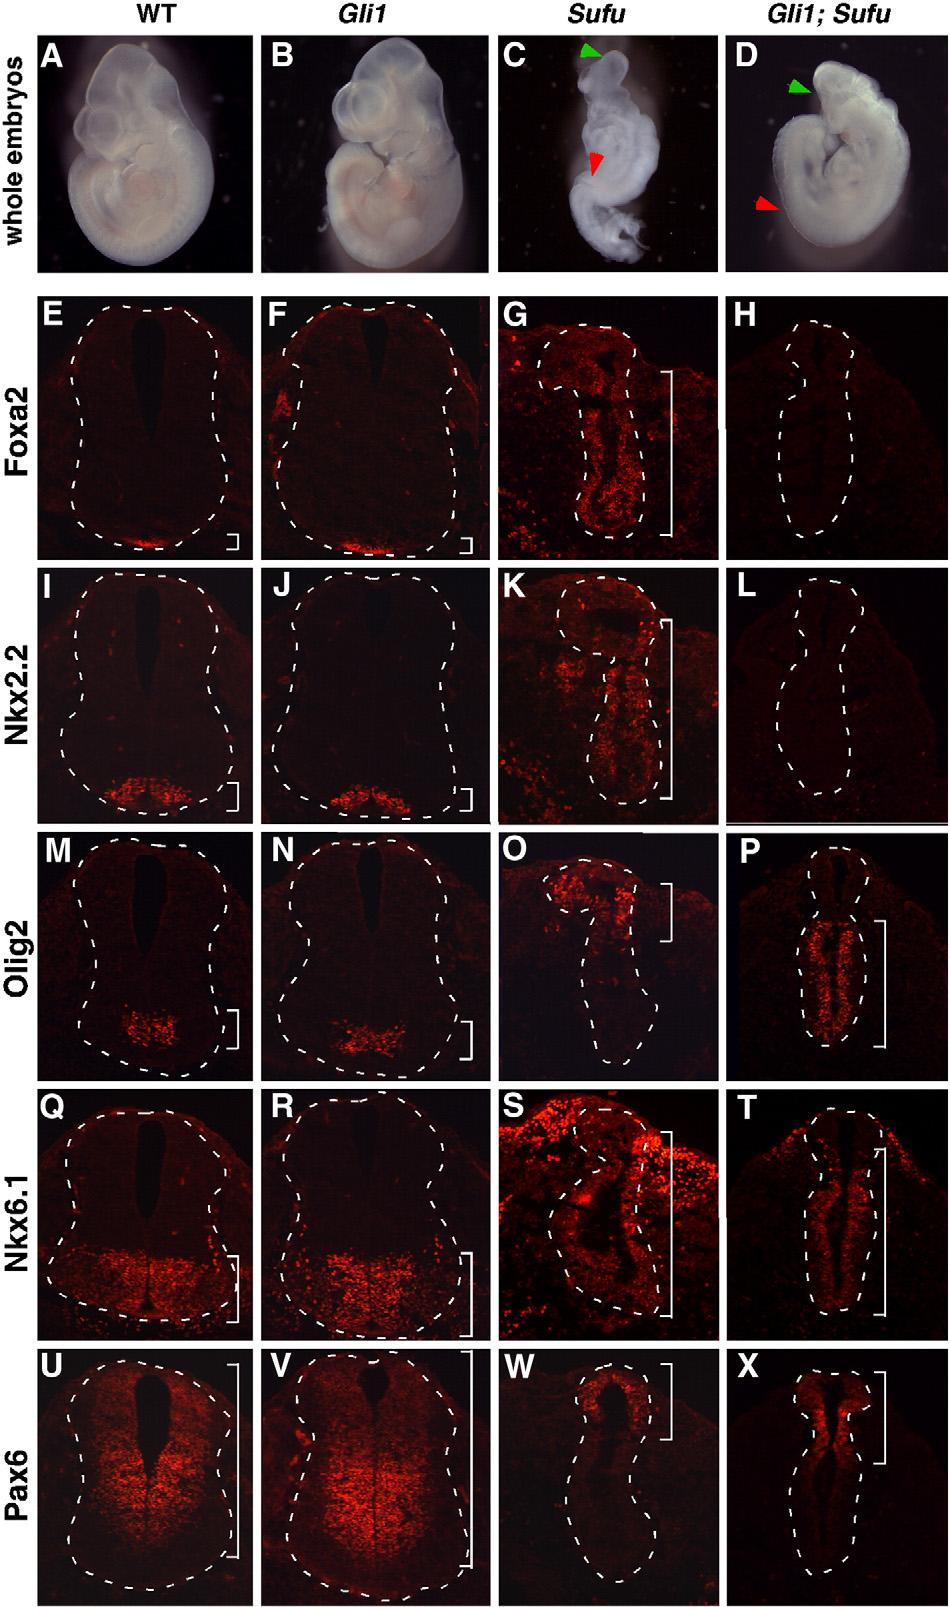 J. Liu et al. / Developmental Biology 362 (2012) 141 153 143 Fig. 1. The floor plate and V3 interneurons fail to form in Gli1;Sufu double mutant embryos. (A D) Lateral views of E10.